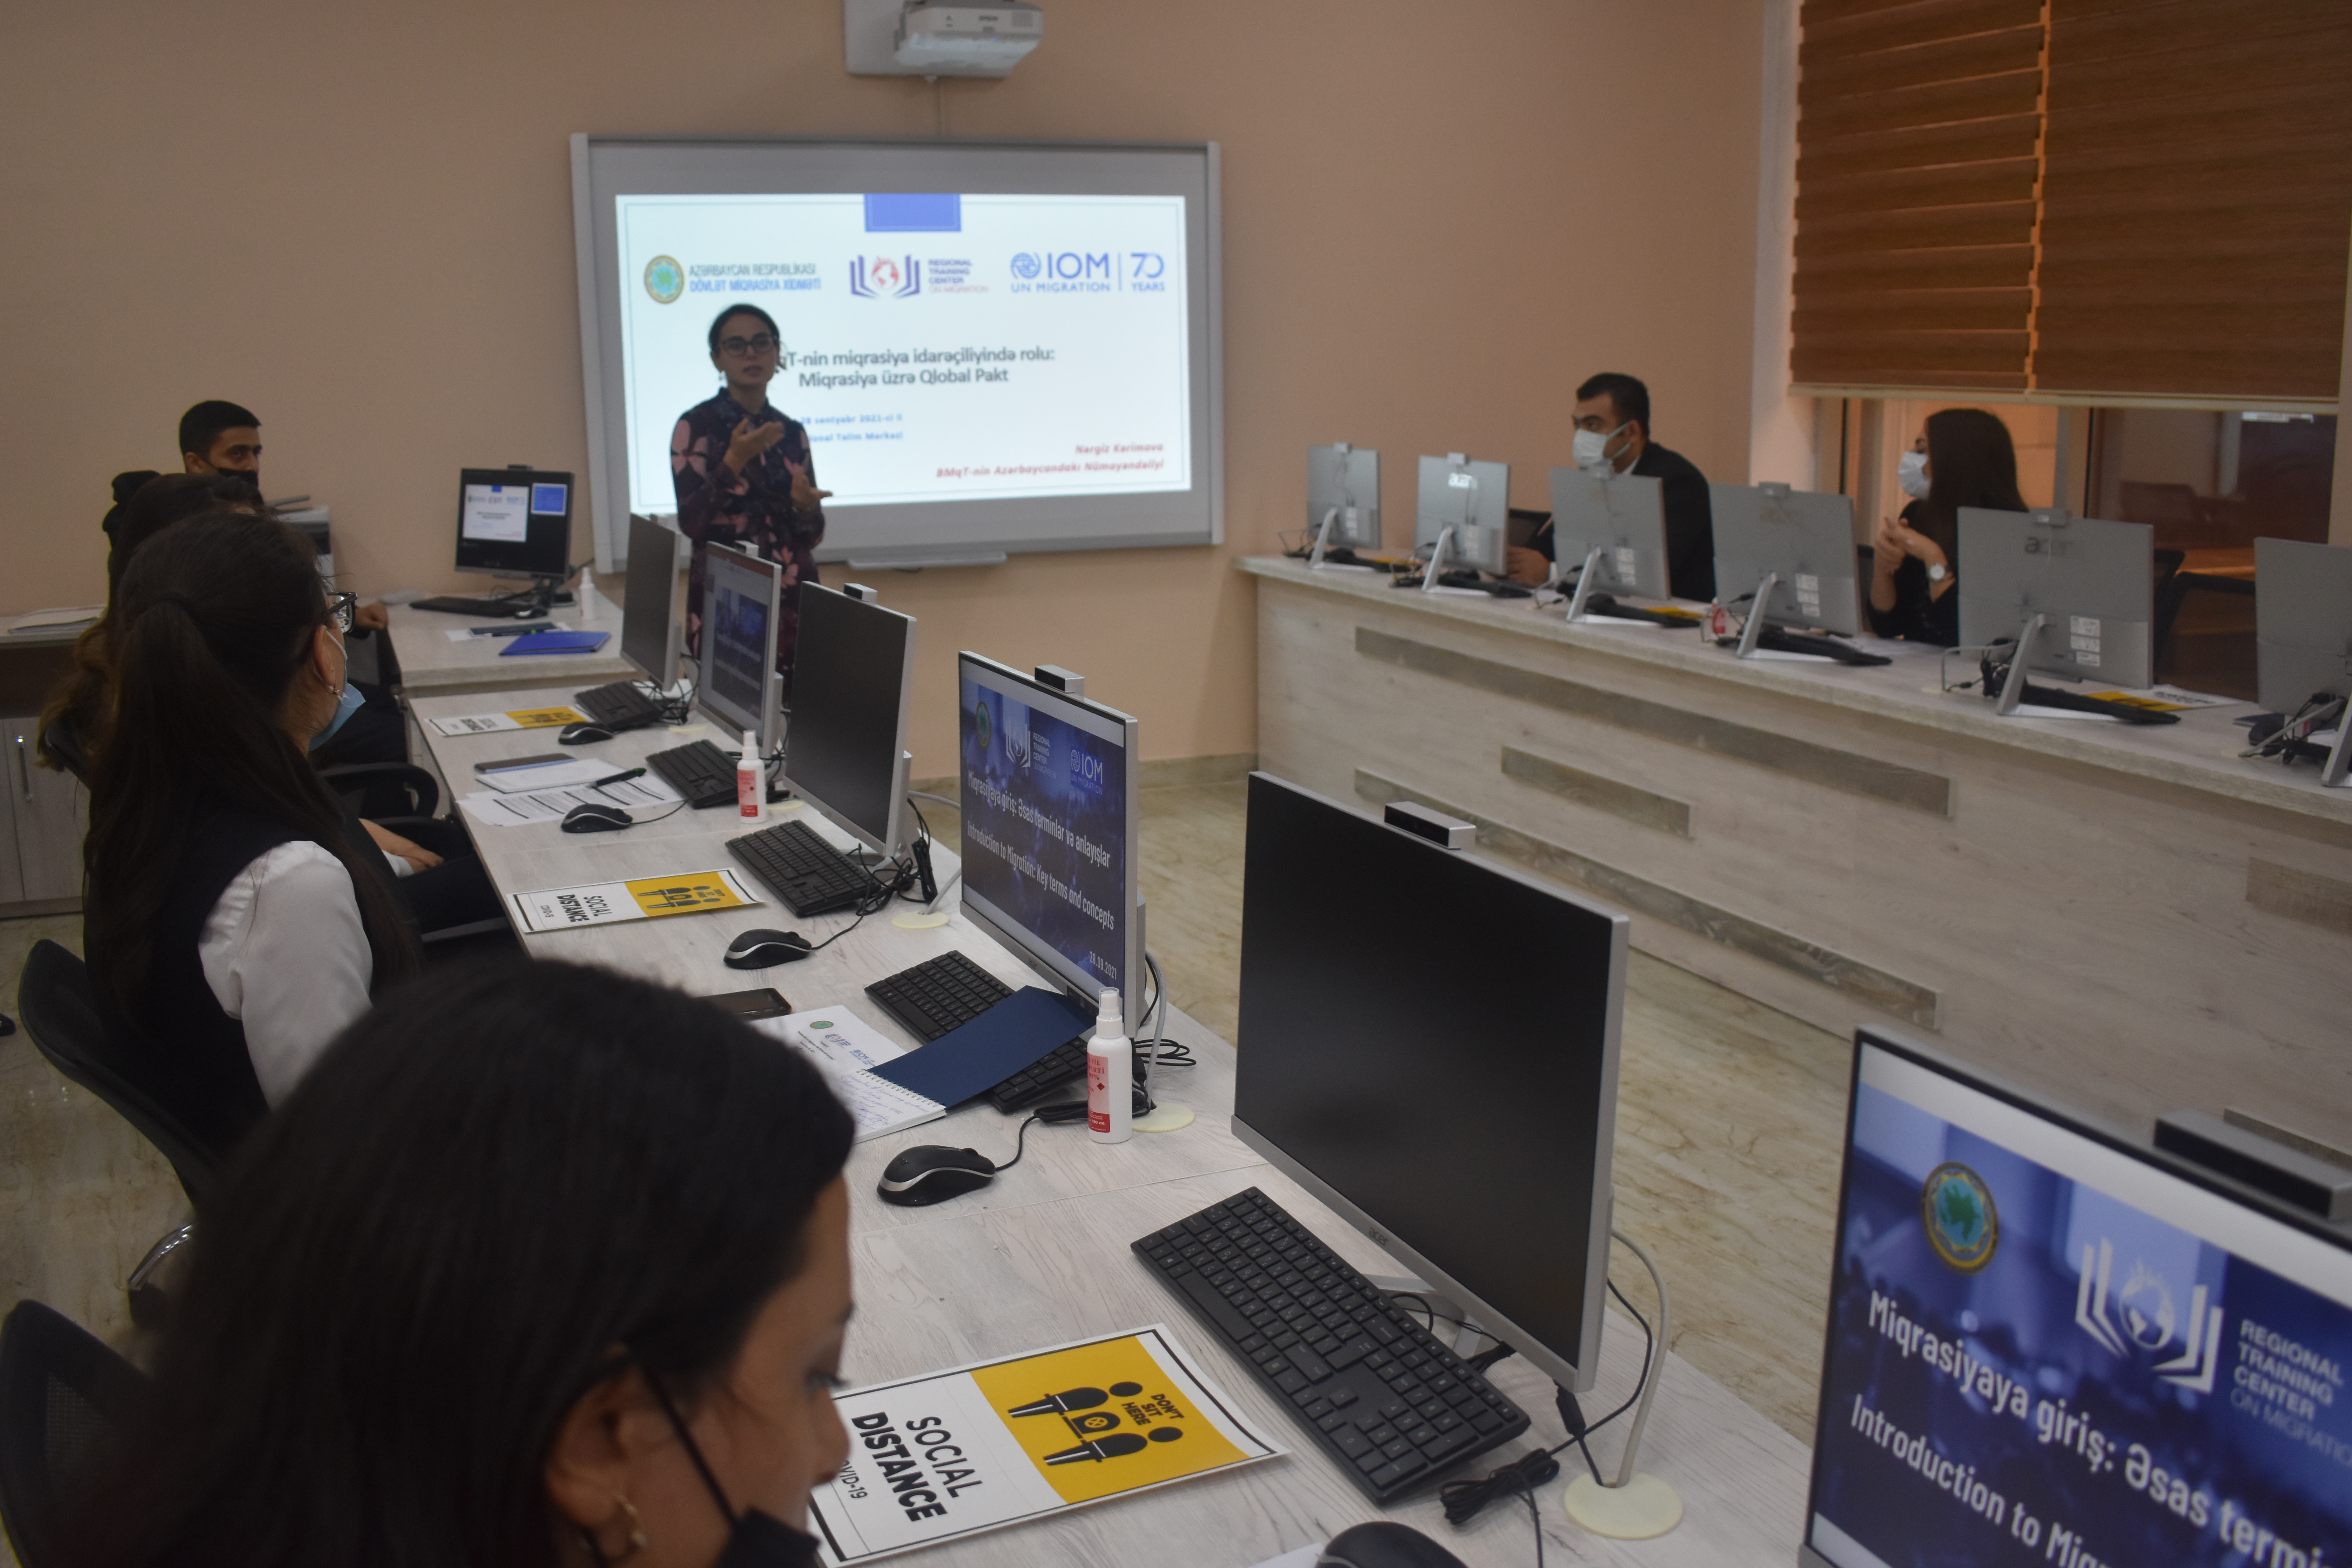 15 stakeholders took part in a training of trainers on key migration terms and concepts held at the Regional Training Centre on Migration in Azerbaijan.